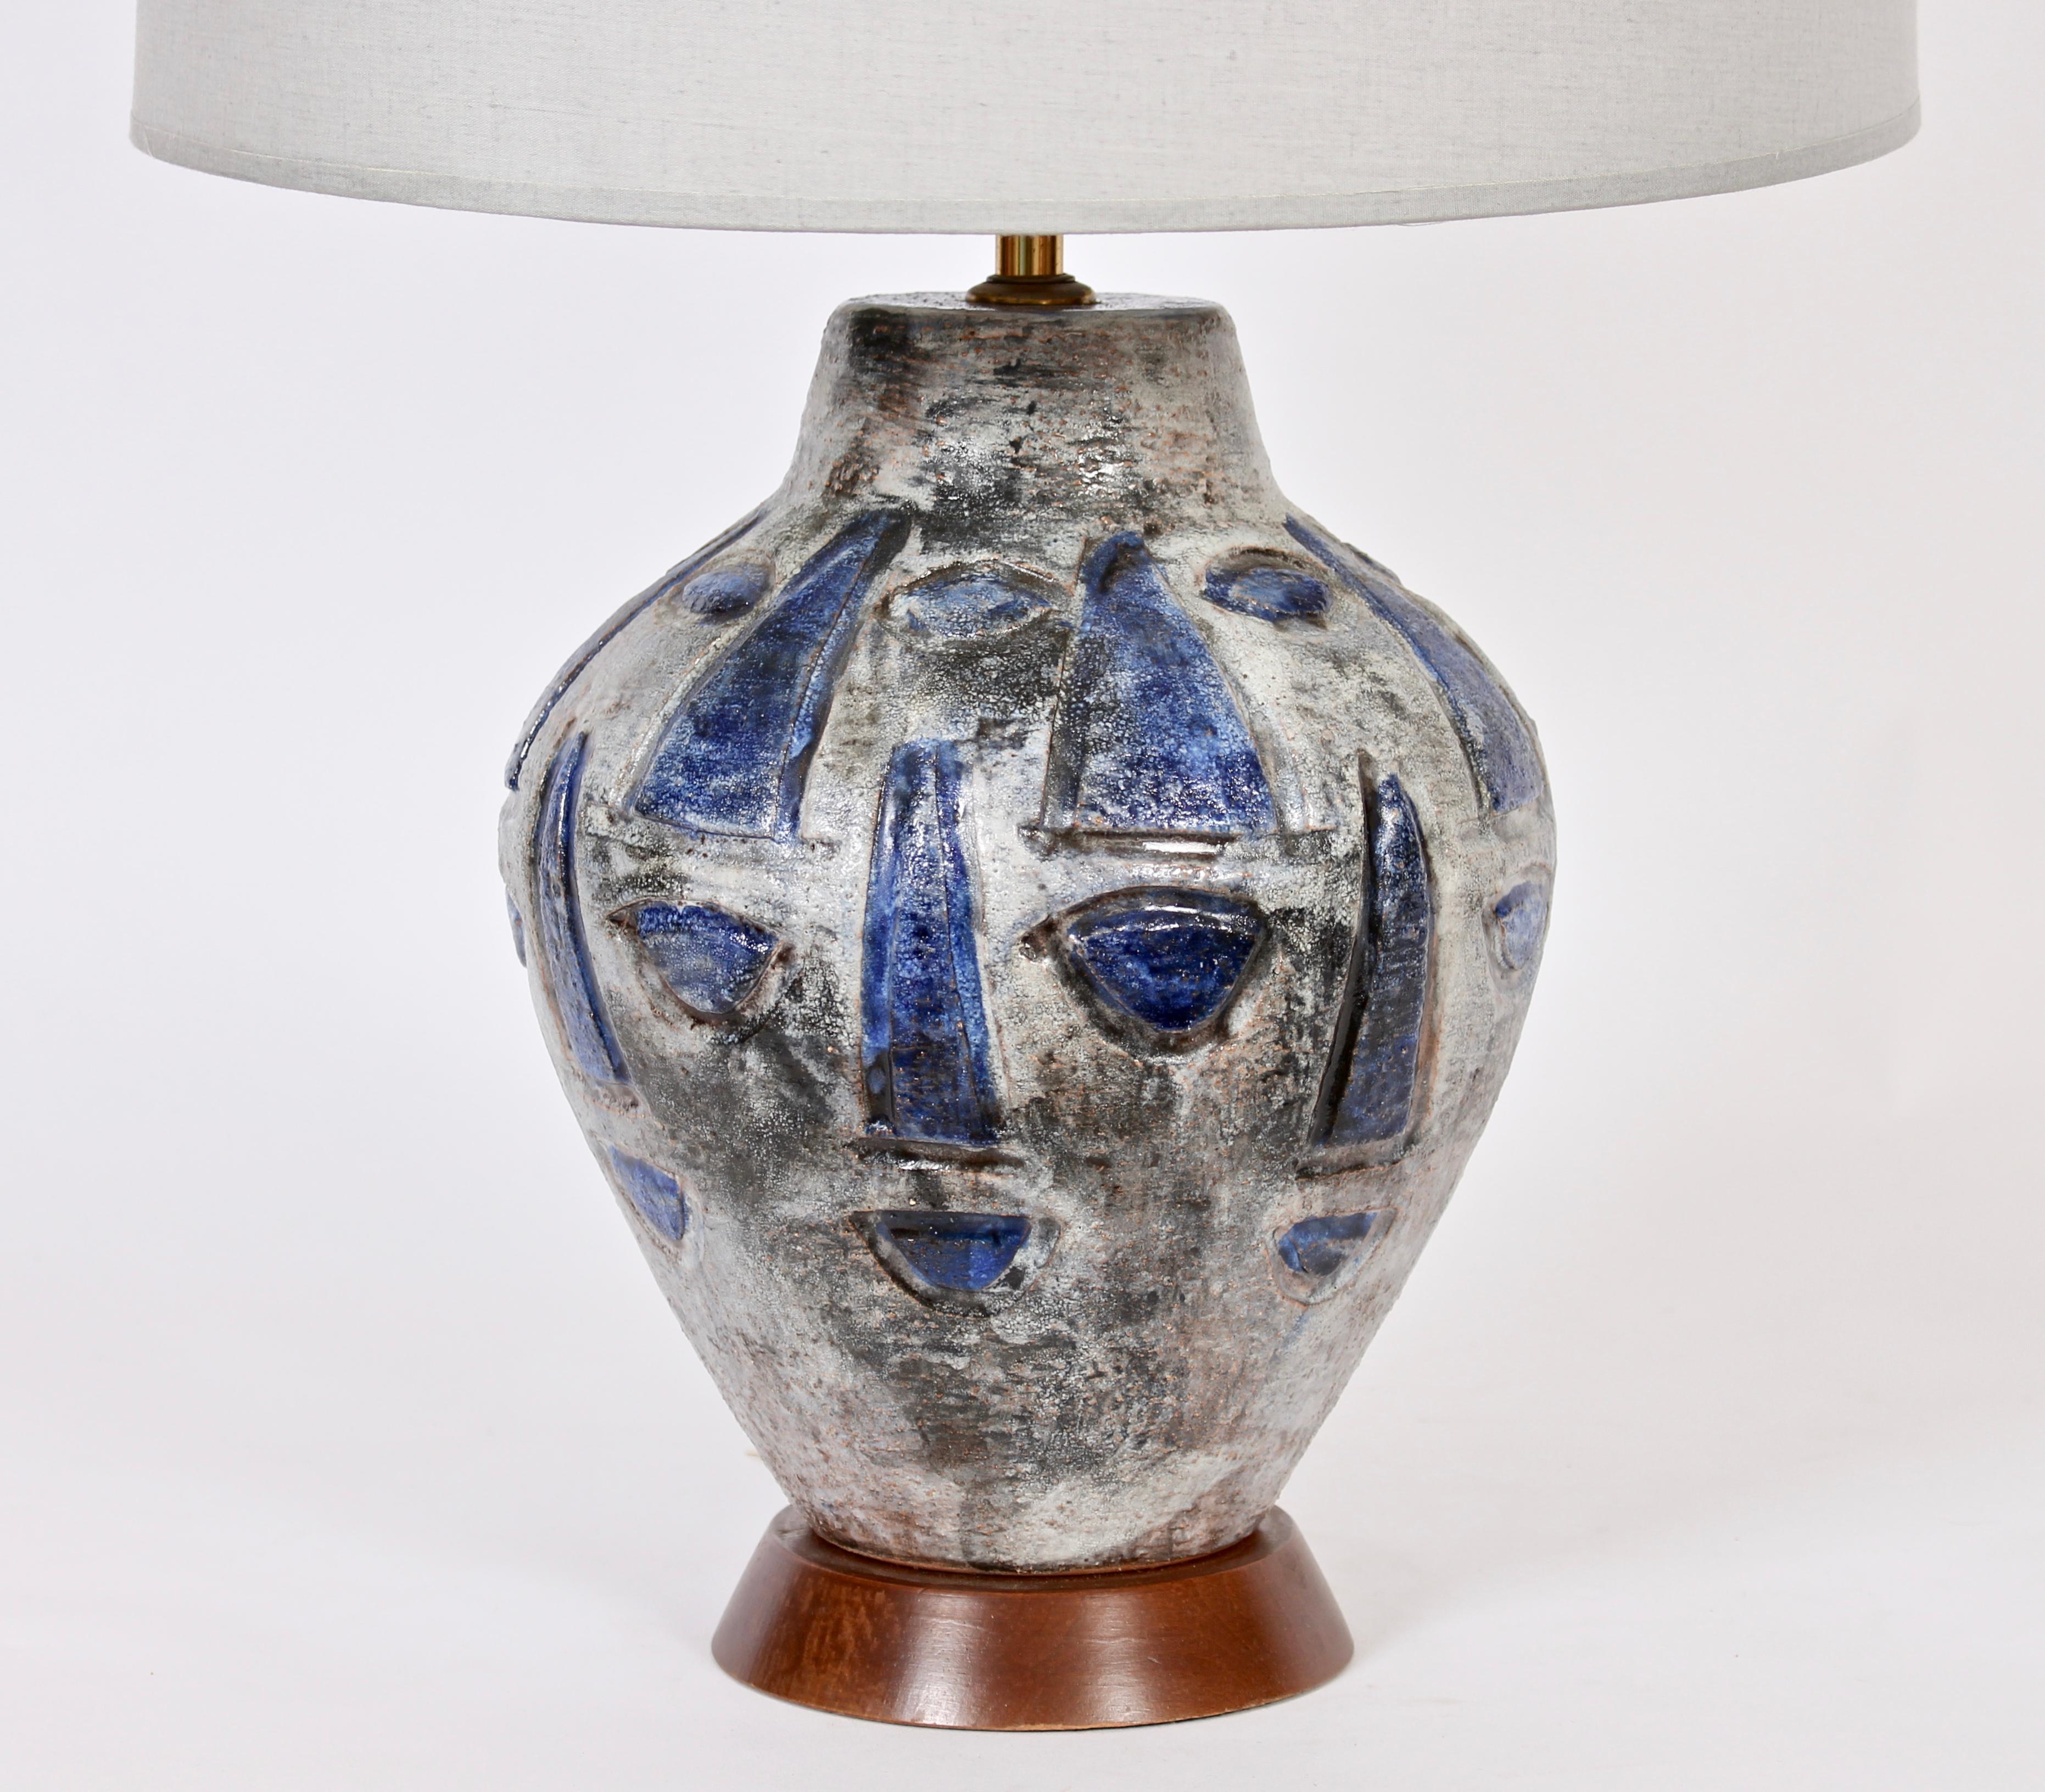 Gustav Spoerri hand painted glazed ceramic art studio table lamp. Featuring a hand crafted sculptural jug form in neutral gray highlighted abstract design lined in black with bright blue oval and triangular shapes. On walnut base. 17 H to top of